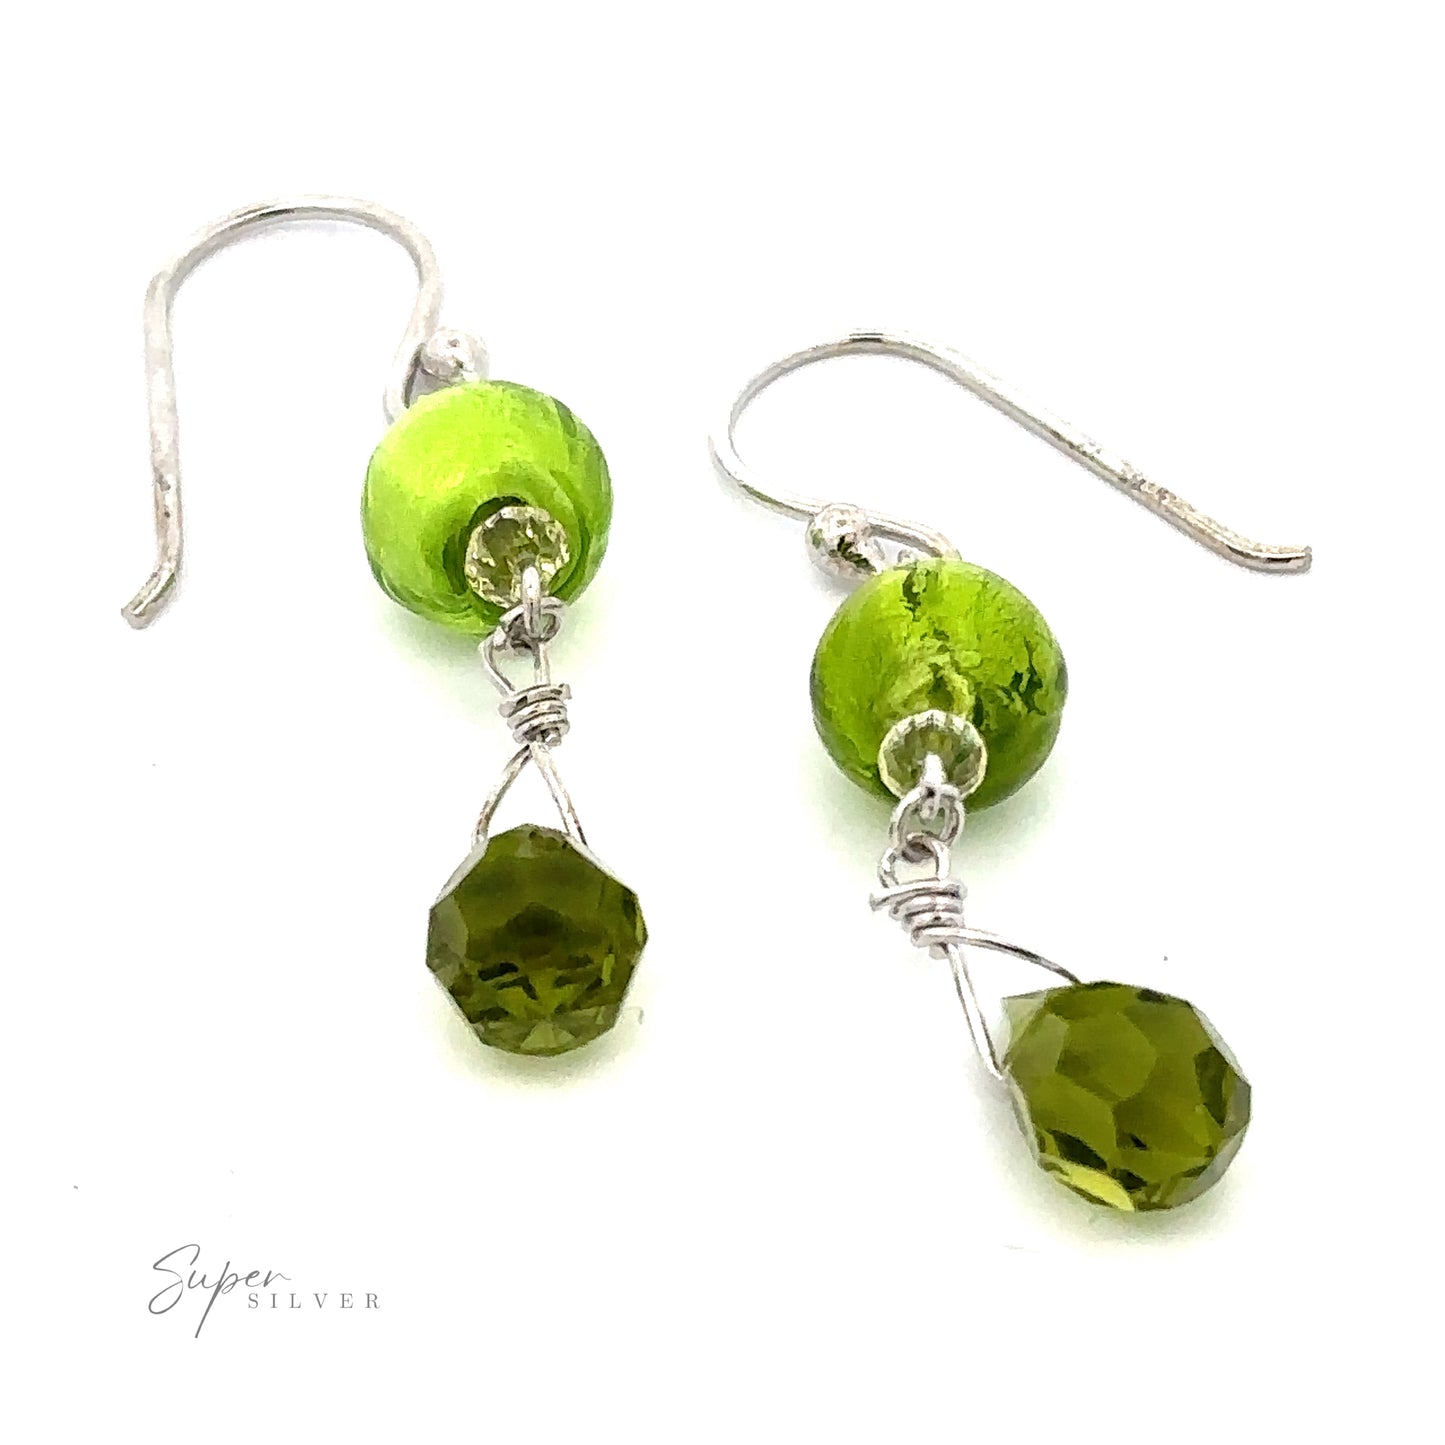 
                  
                    A pair of Dangly Green Beaded Earrings with green spherical beads and faceted teardrop-shaped pendants. These exquisite green dangly earrings bear the brand name "Super Silver" in the corner.
                  
                